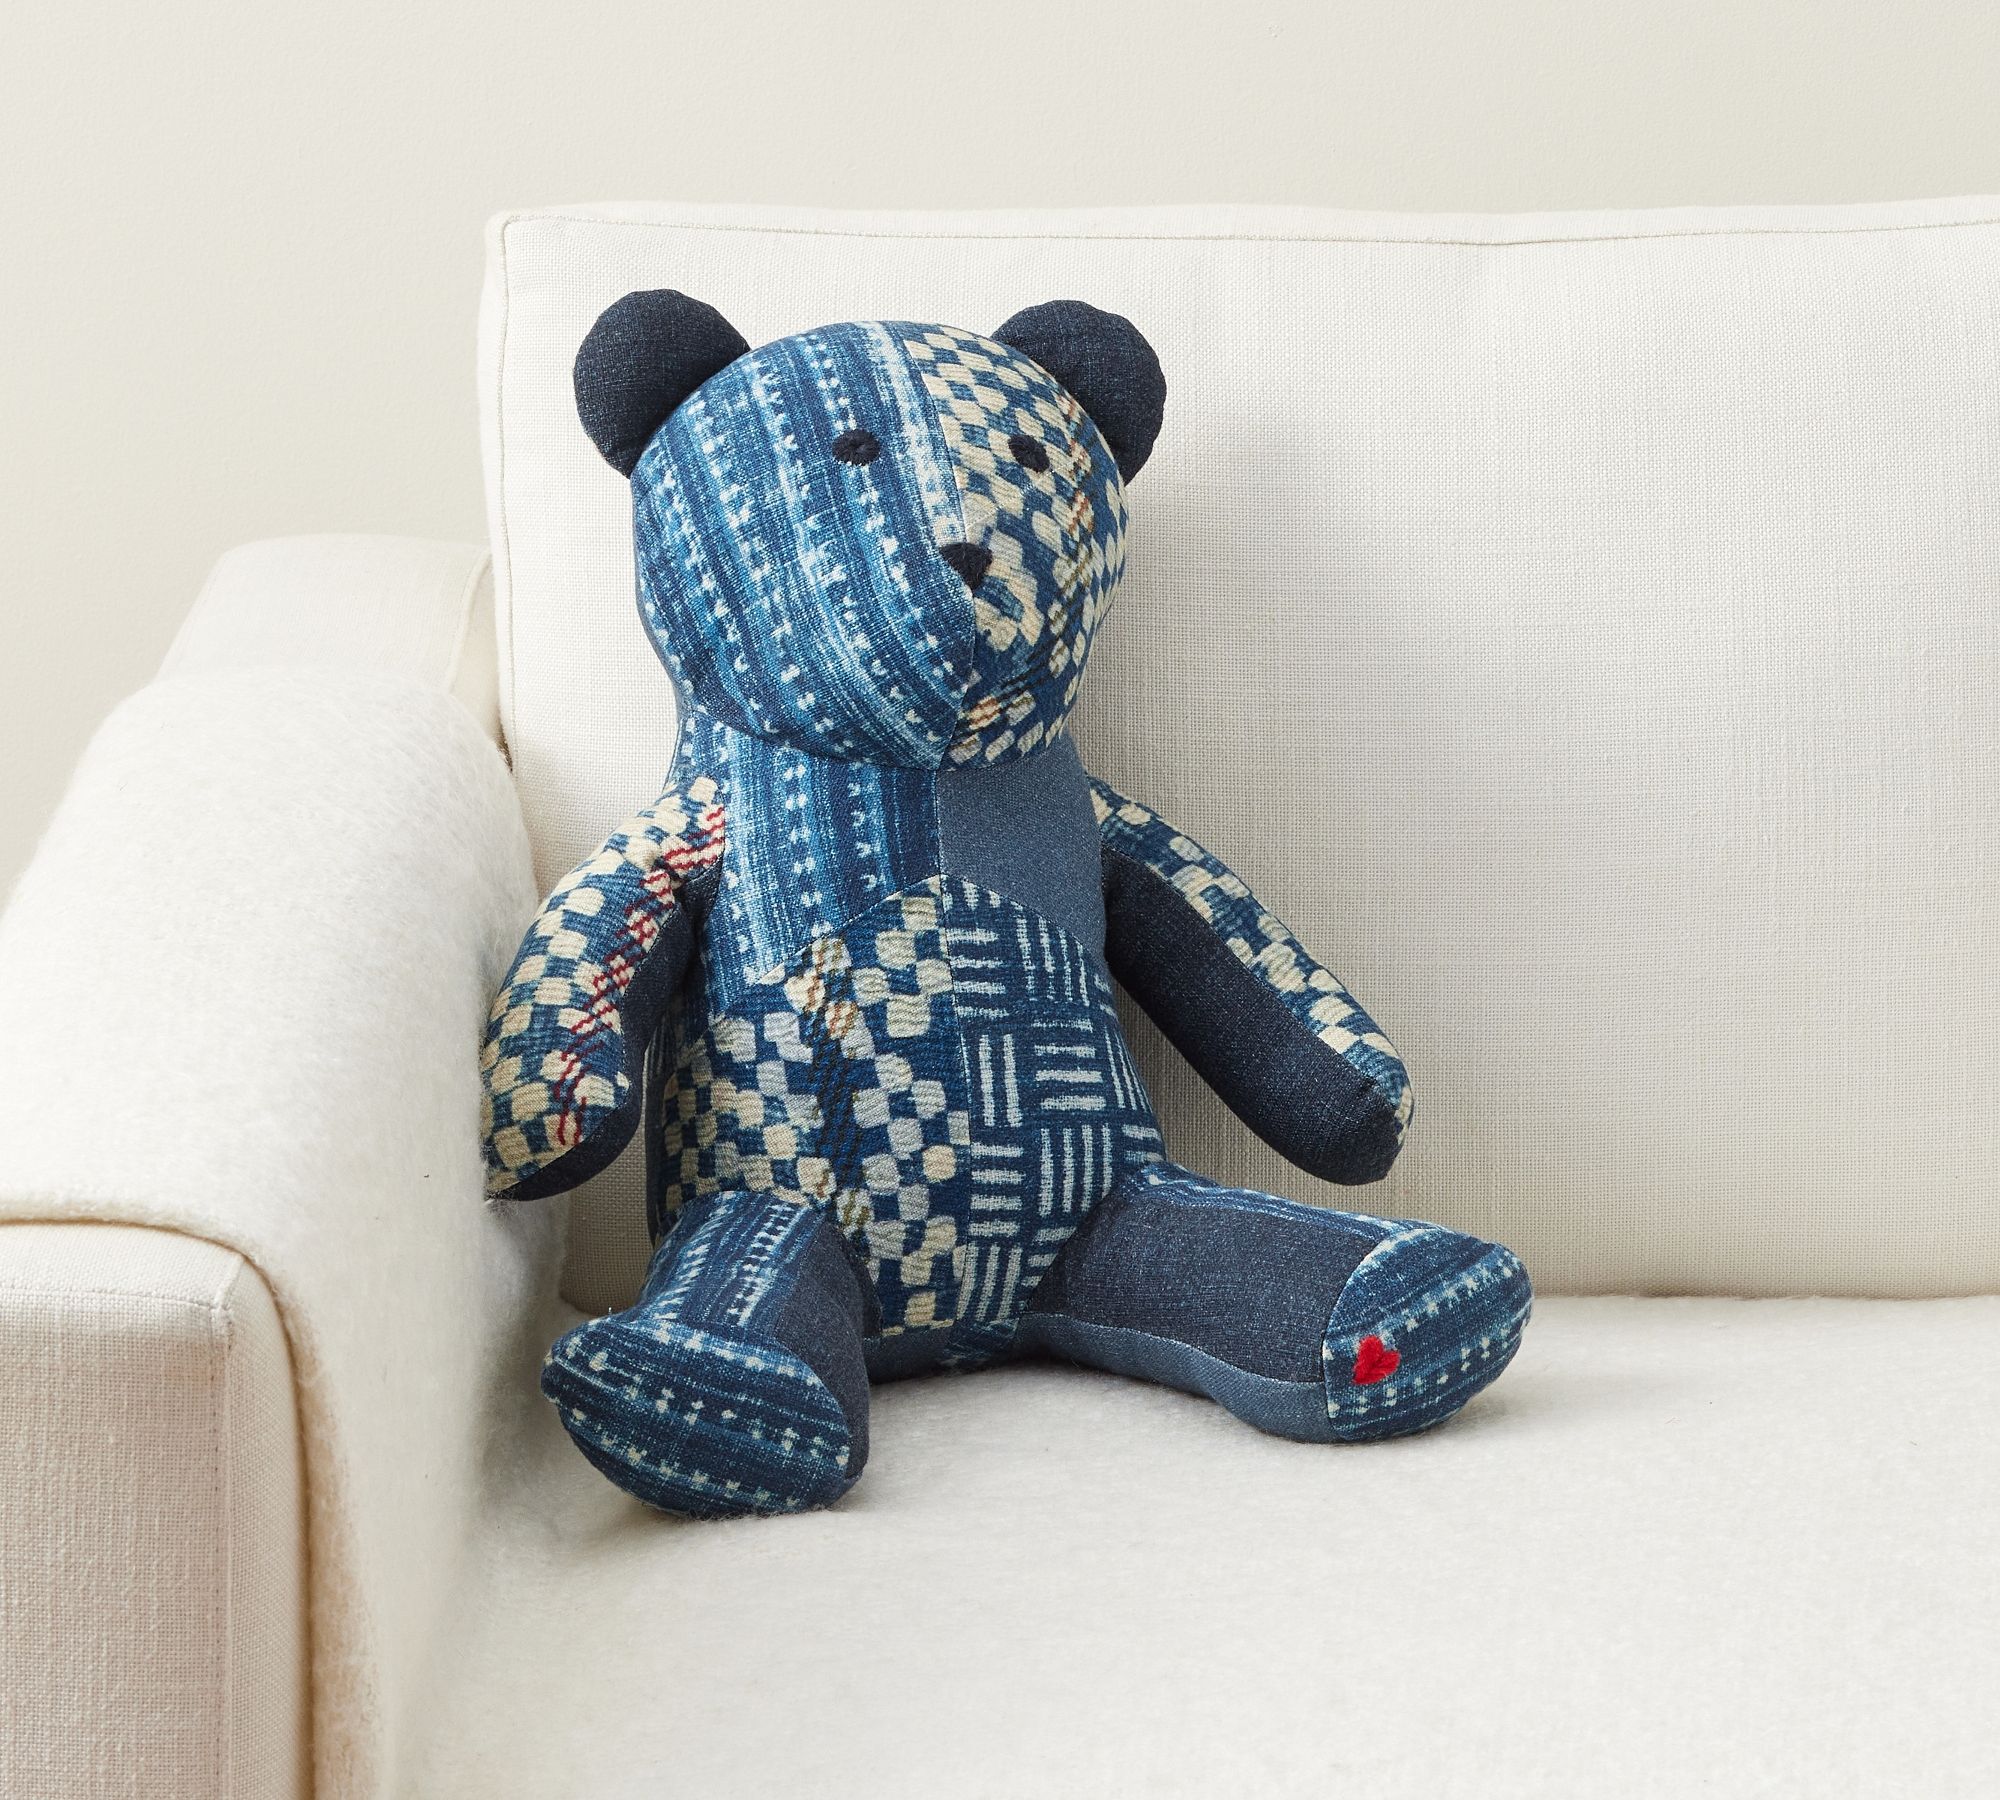 Nelson Patchwork Teddy Shaped Pillow